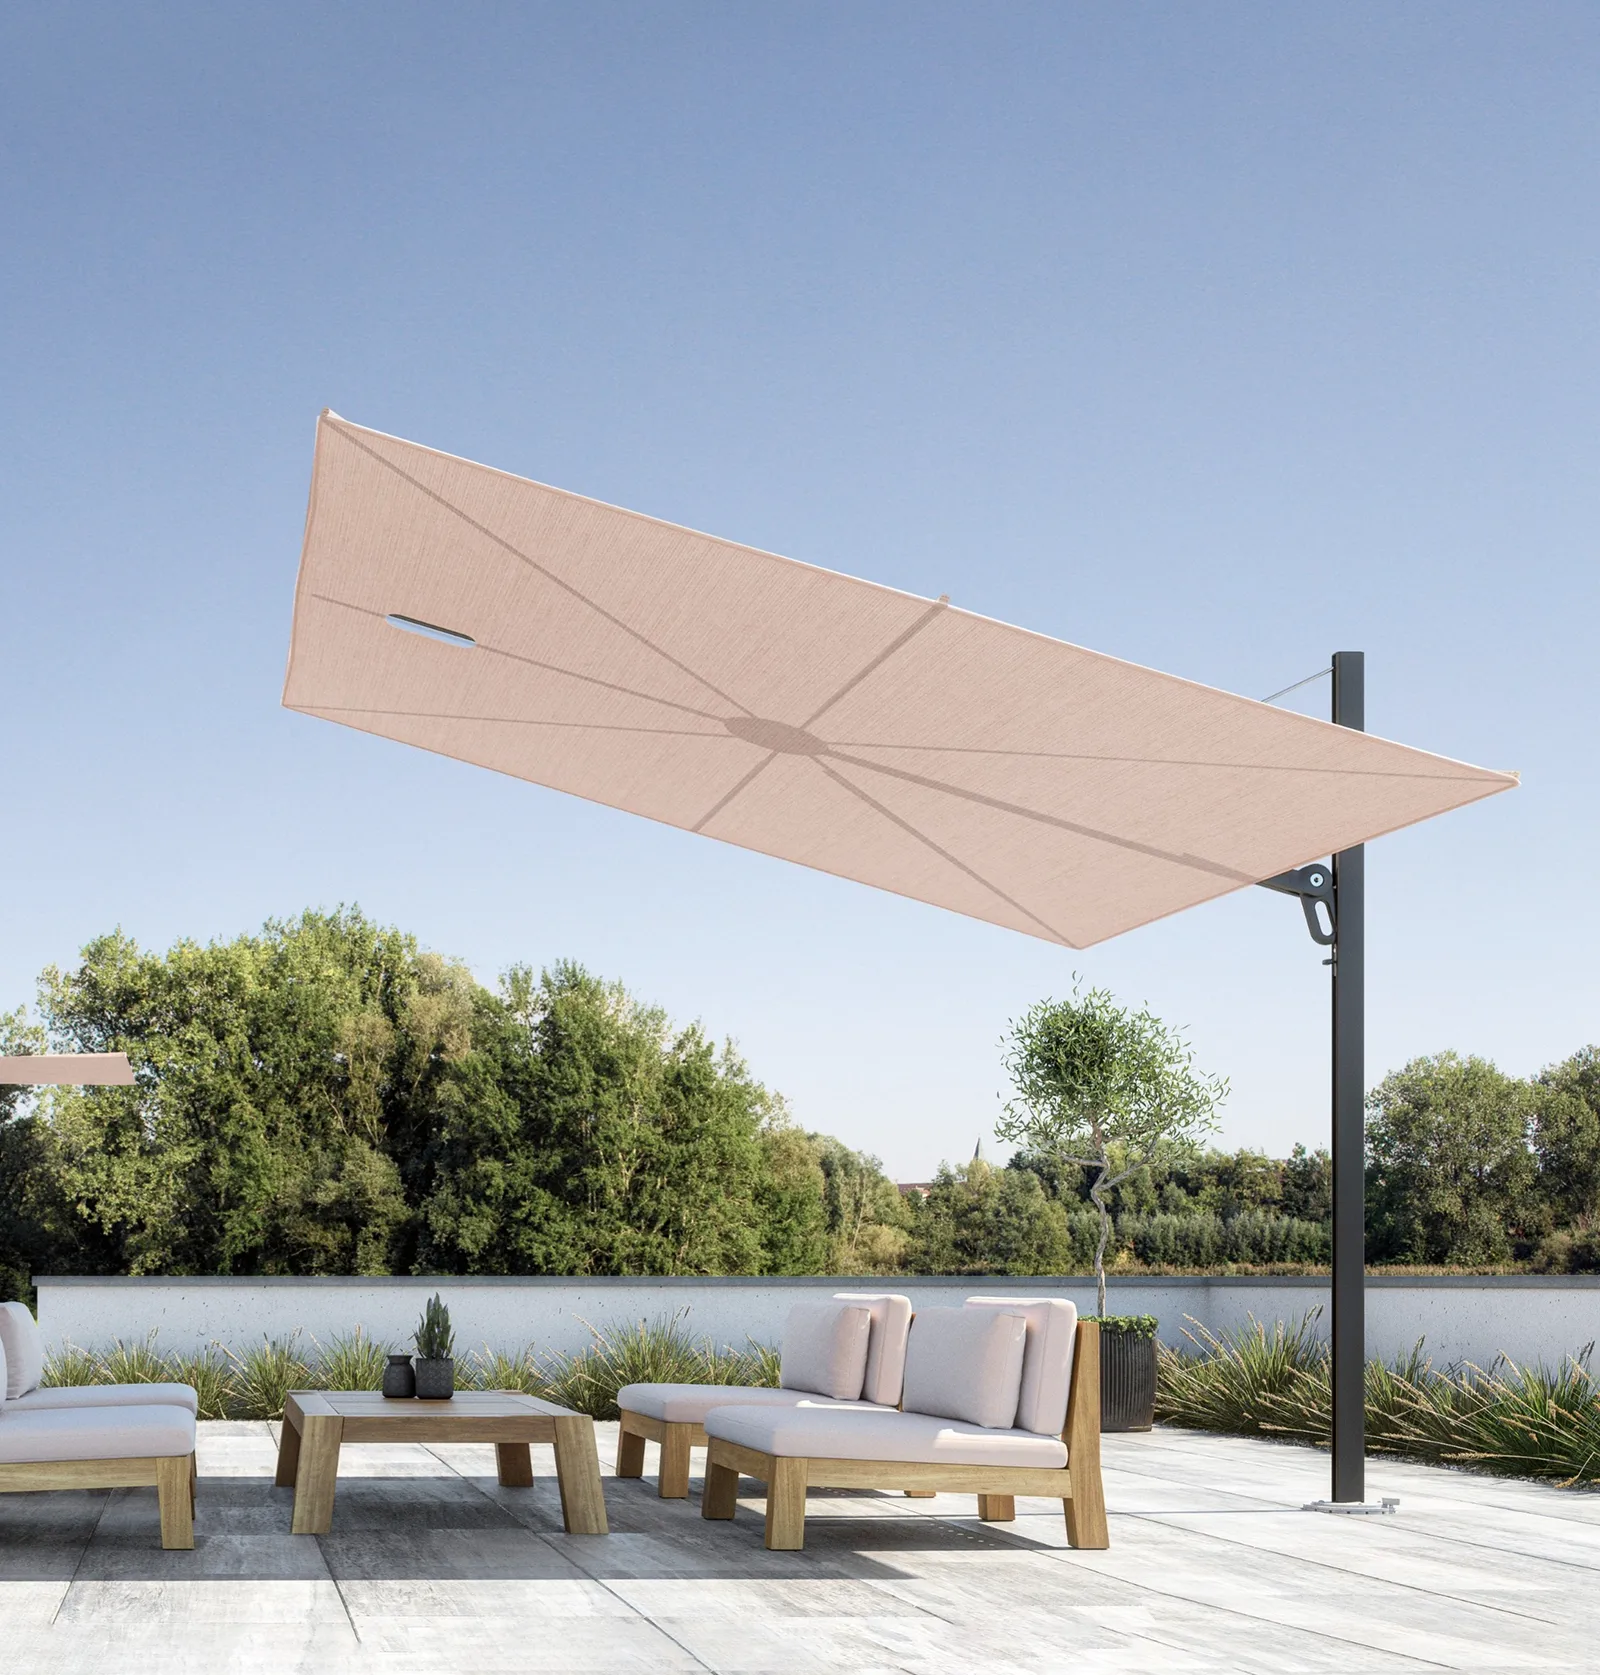 Find out more about UMBROSA's product ranges. Contemporary umbrellas and shade solutions.